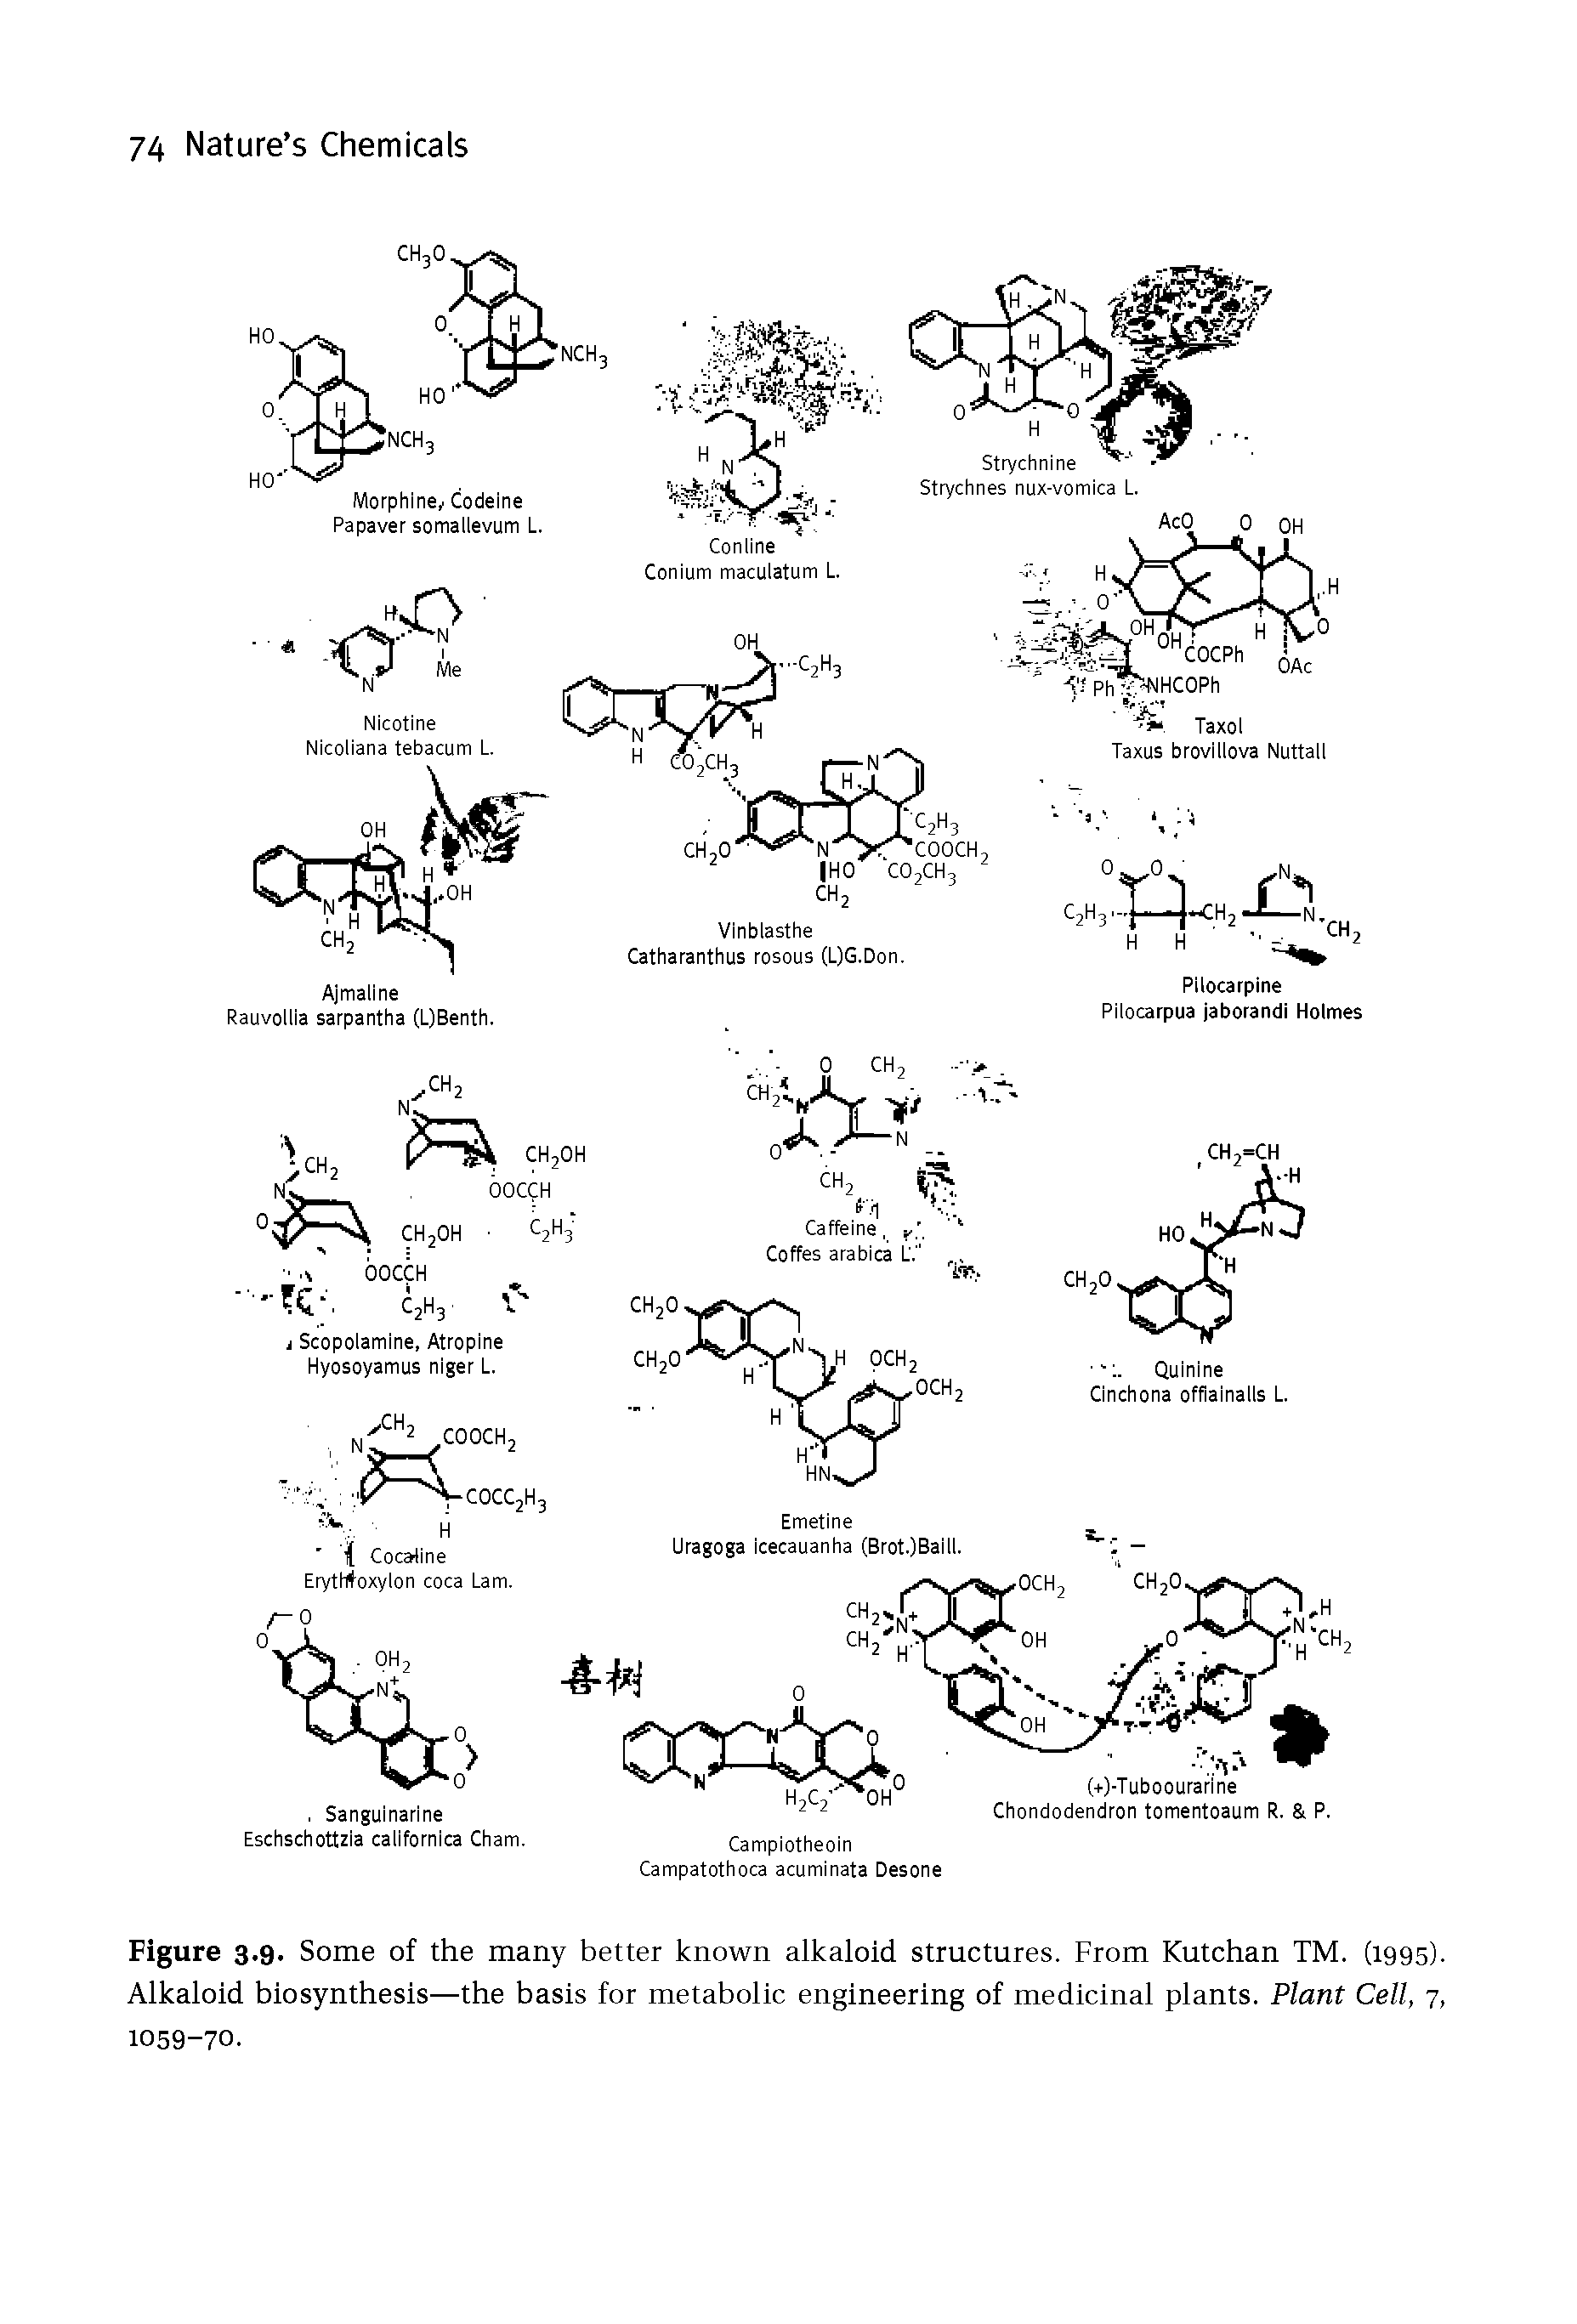 Figure 3.9. Some of the many better known alkaloid structures. From Kutchan TM. (1995). Alkaloid biosynthesis—the basis for metabolic engineering of medicinal plants. Plant Cell, 7, 1059-70.